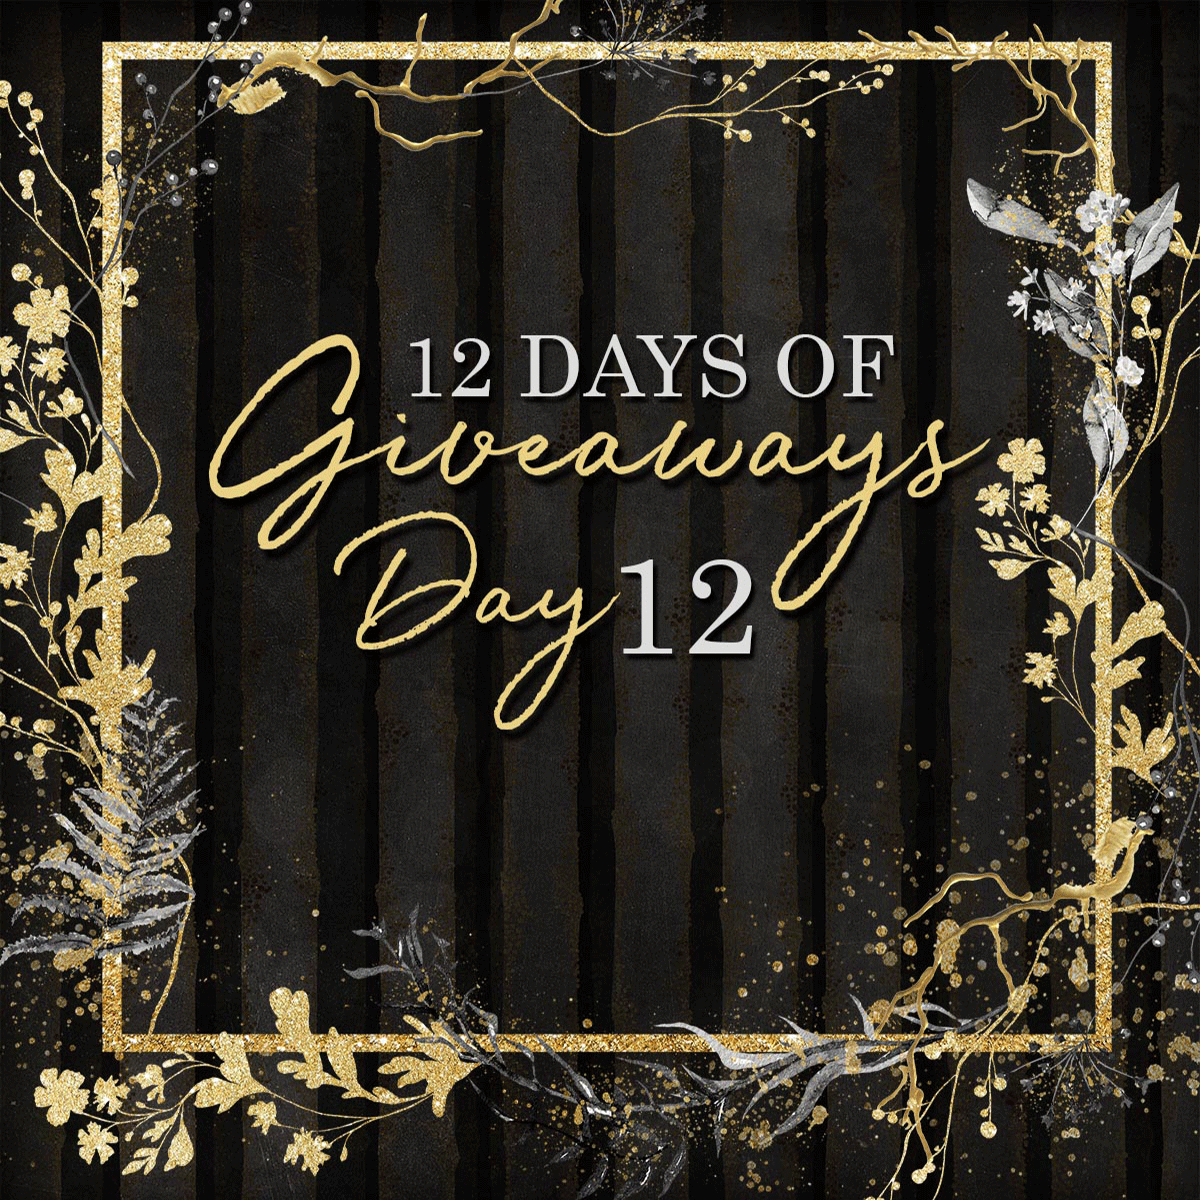 12 Days of Gossmas: Win the ultimate gift for beauty lovers from